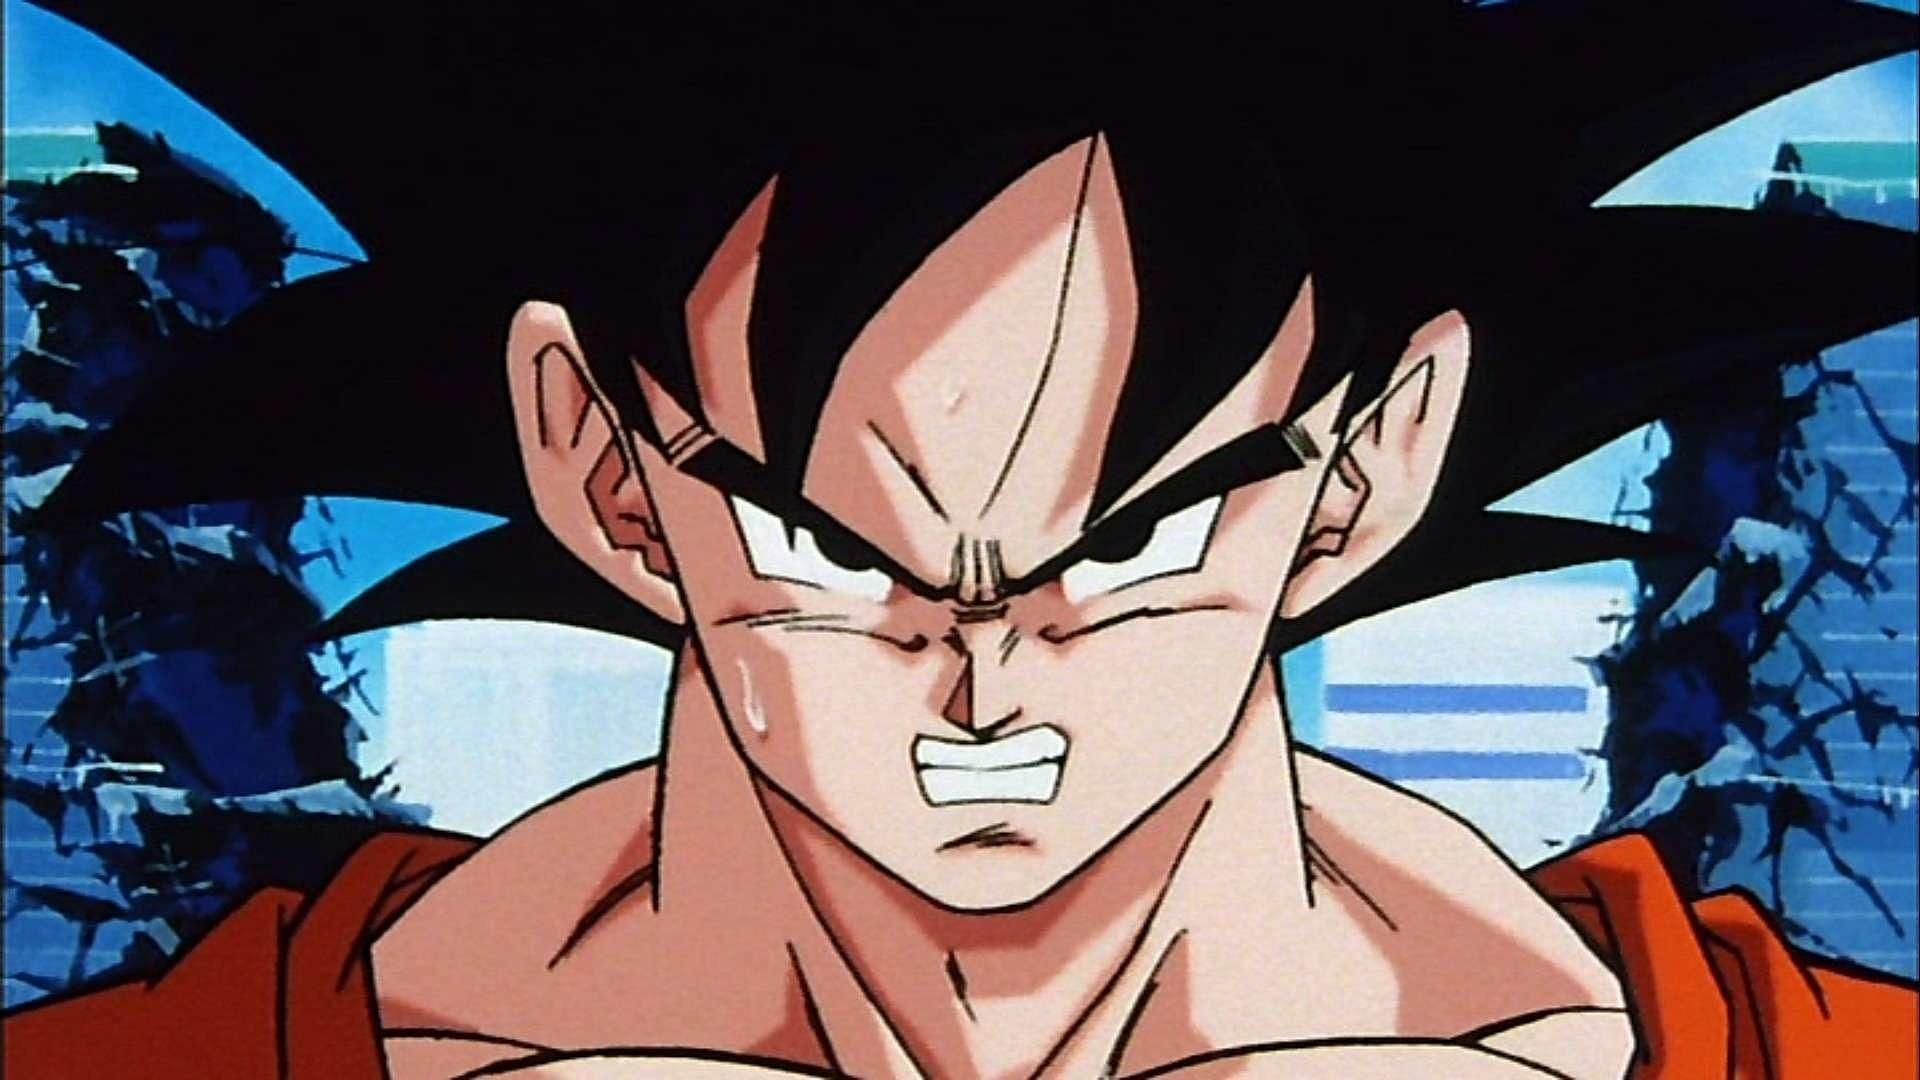 Taking a look at the events surrounding Goku